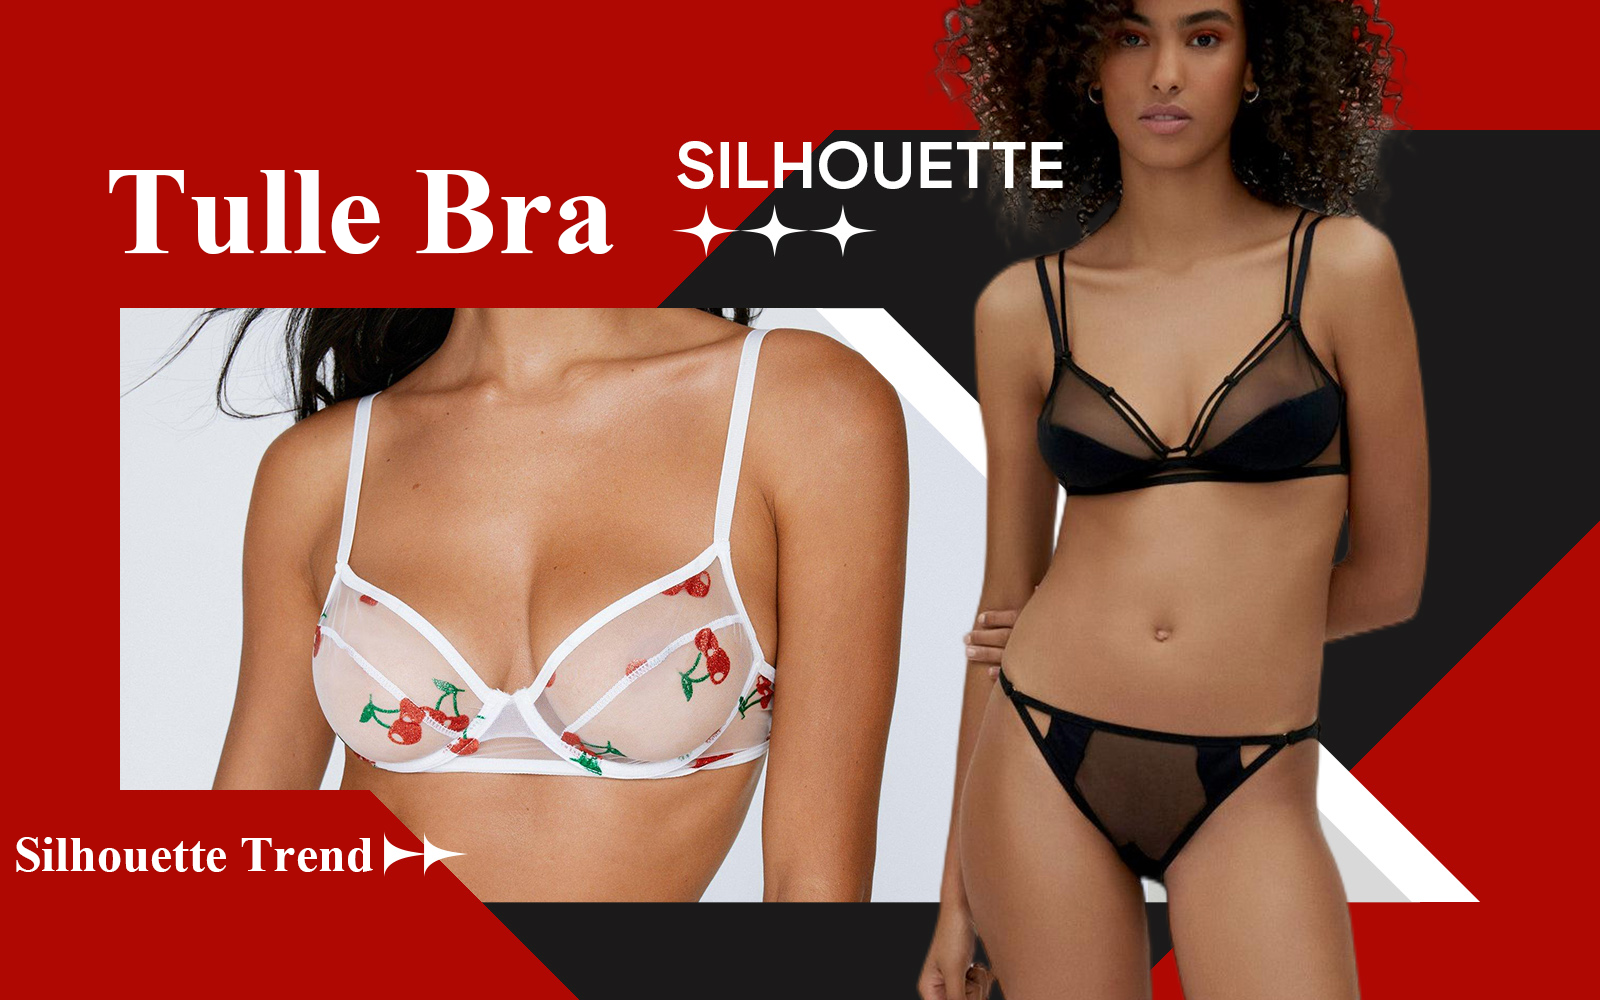 Lightweight & Comfortable -- The Silhouette Trend for Women's Tulle Bra